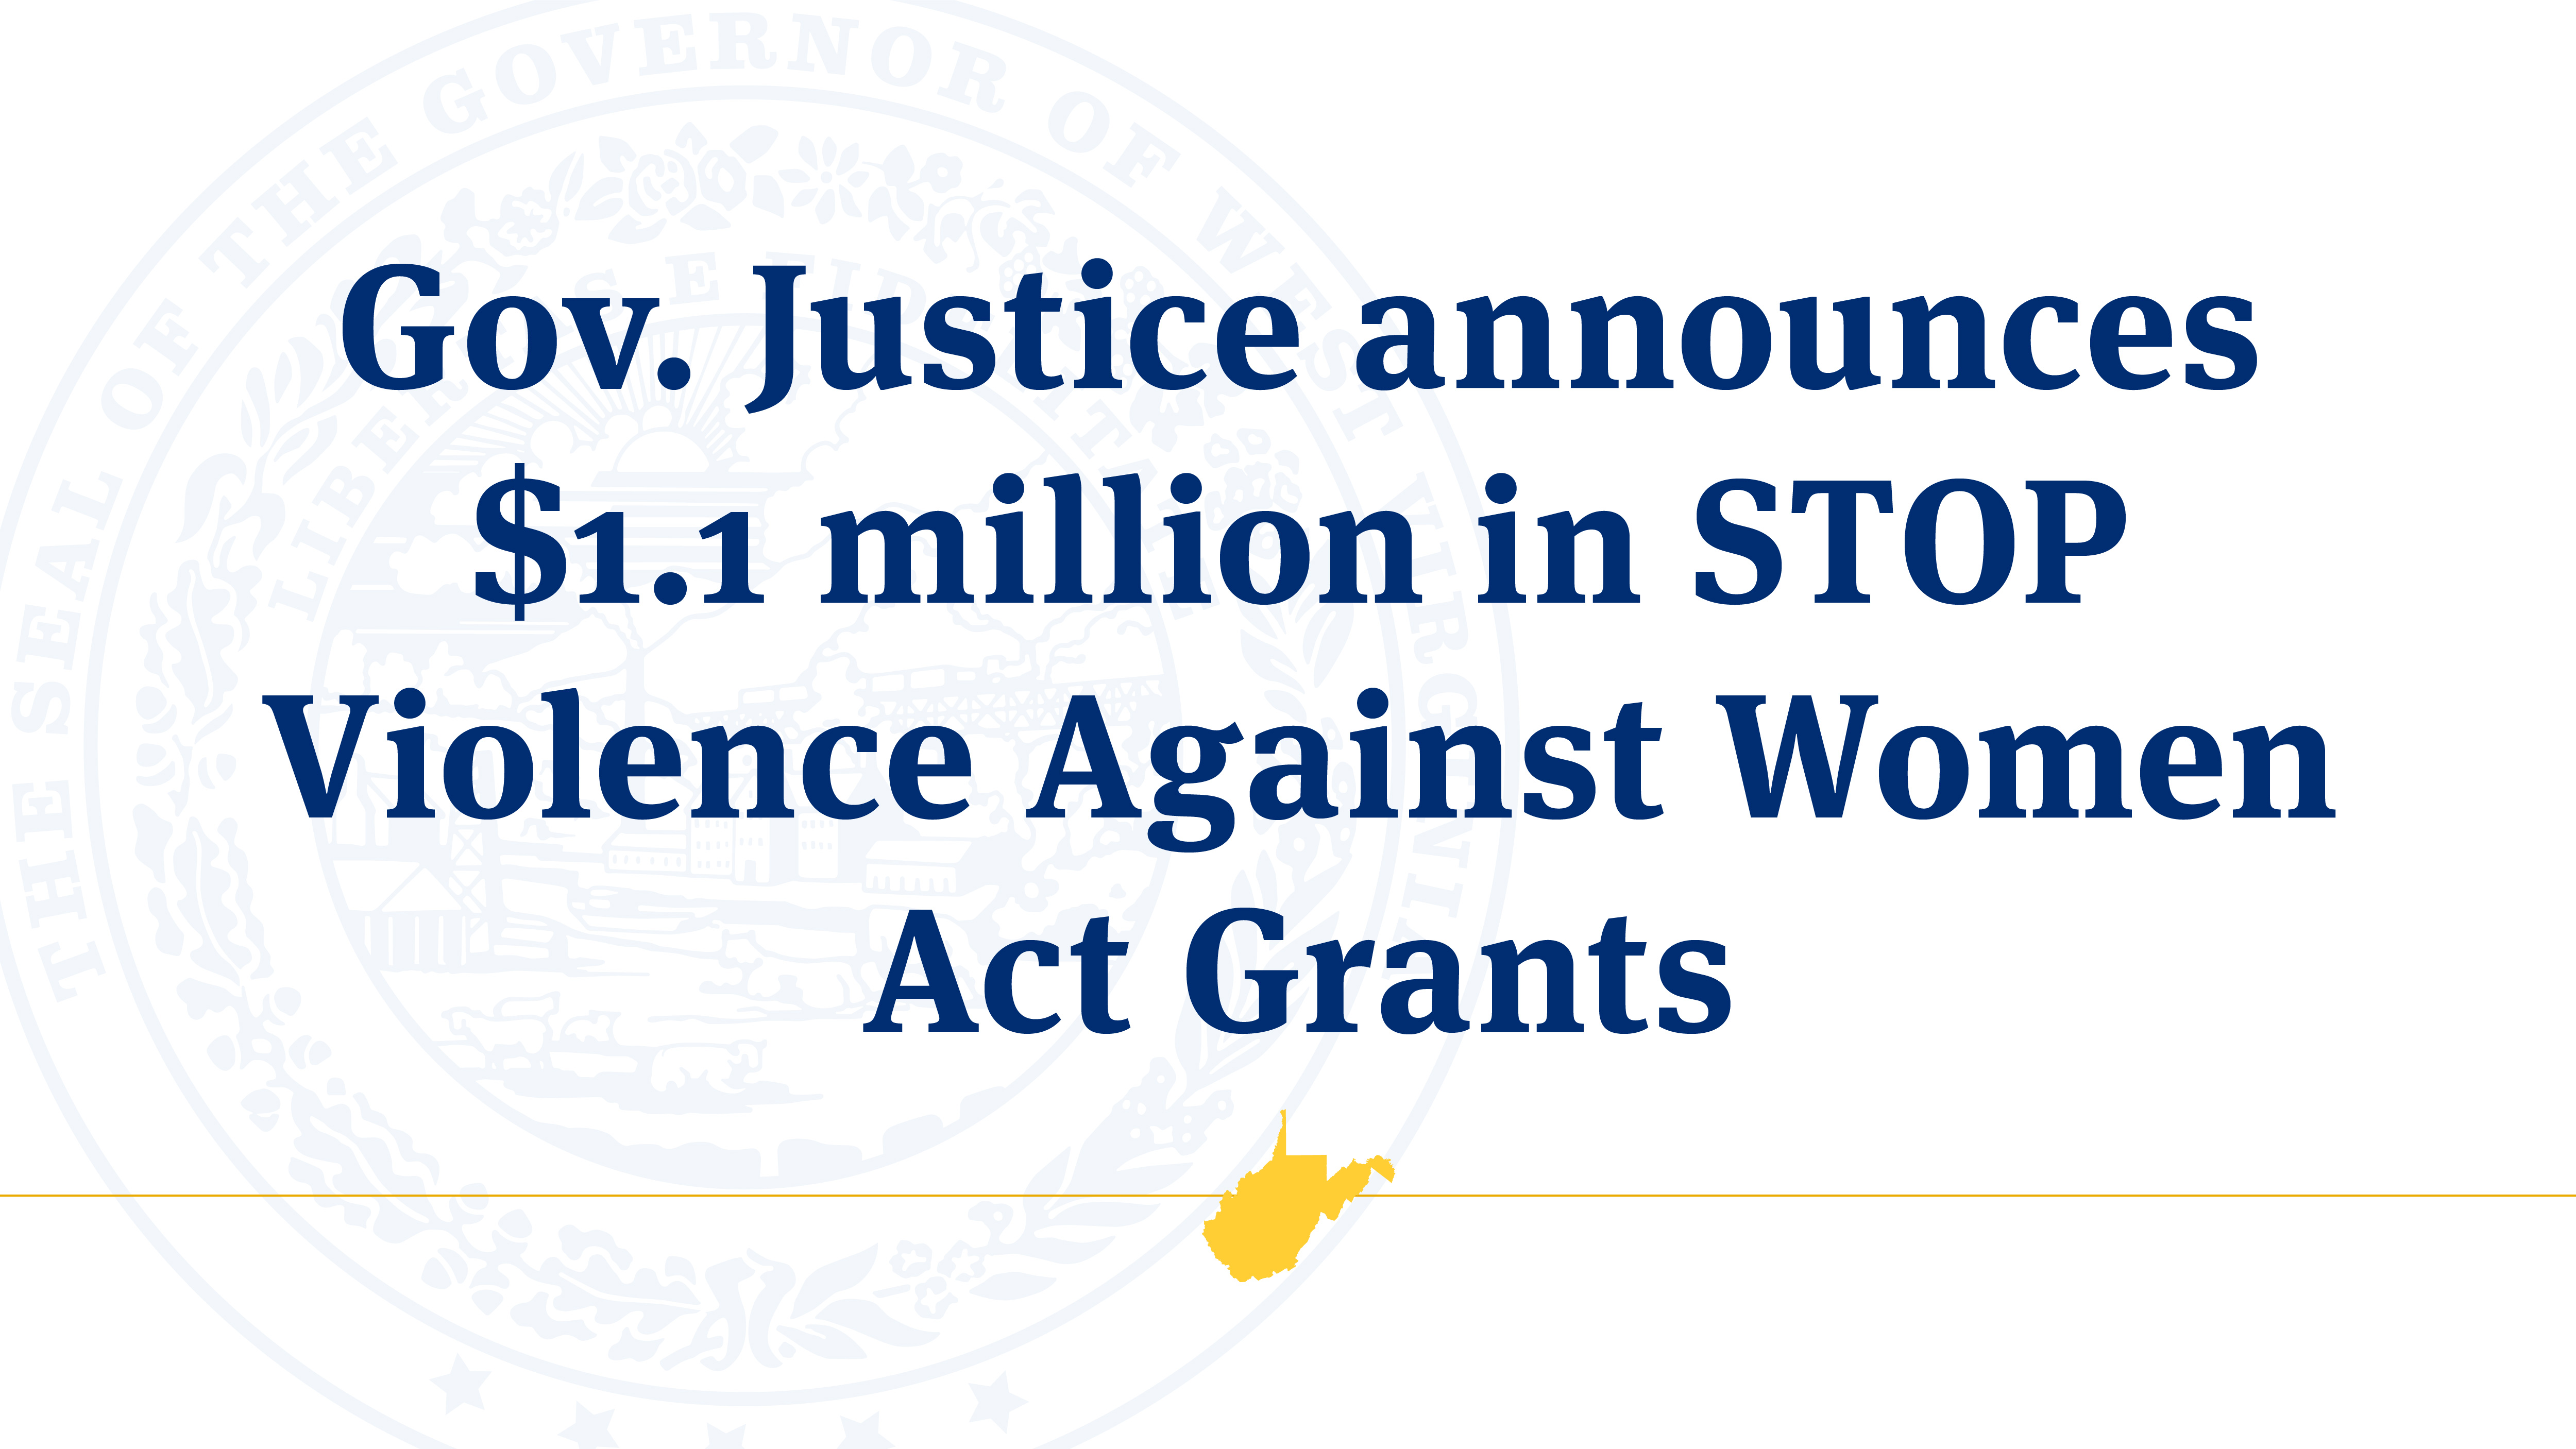 Gov. Justice announces 1.1 million in STOP Violence Against Women Act